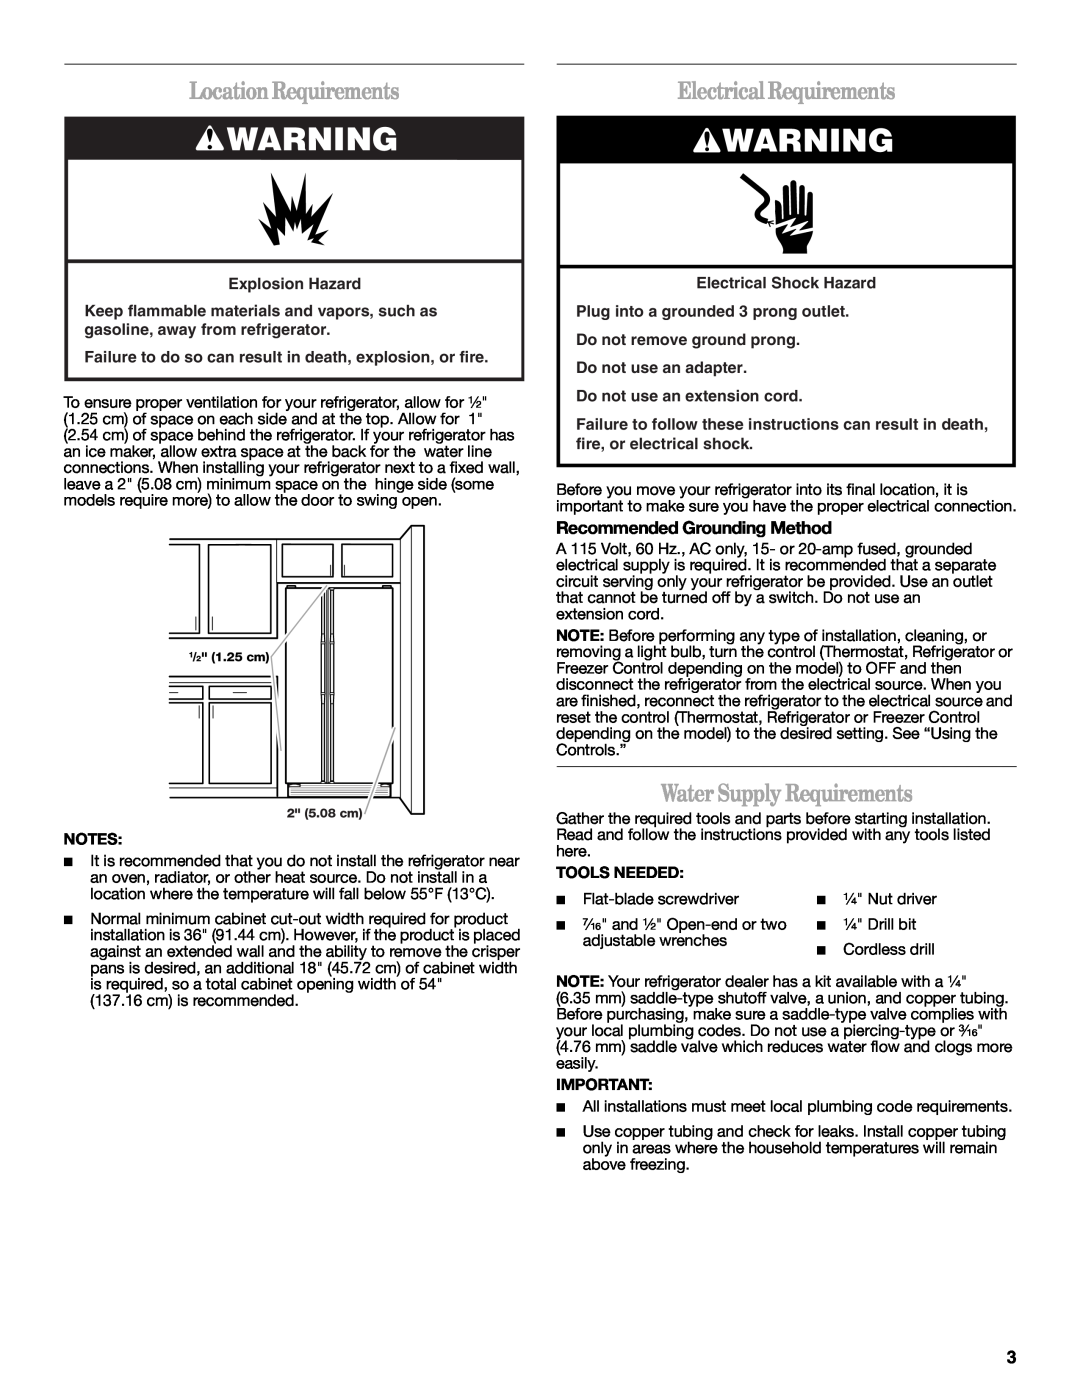 Whirlpool W10193164A LocationRequirements, Electrical Requirements, Water Supply Requirements, Explosion Hazard 